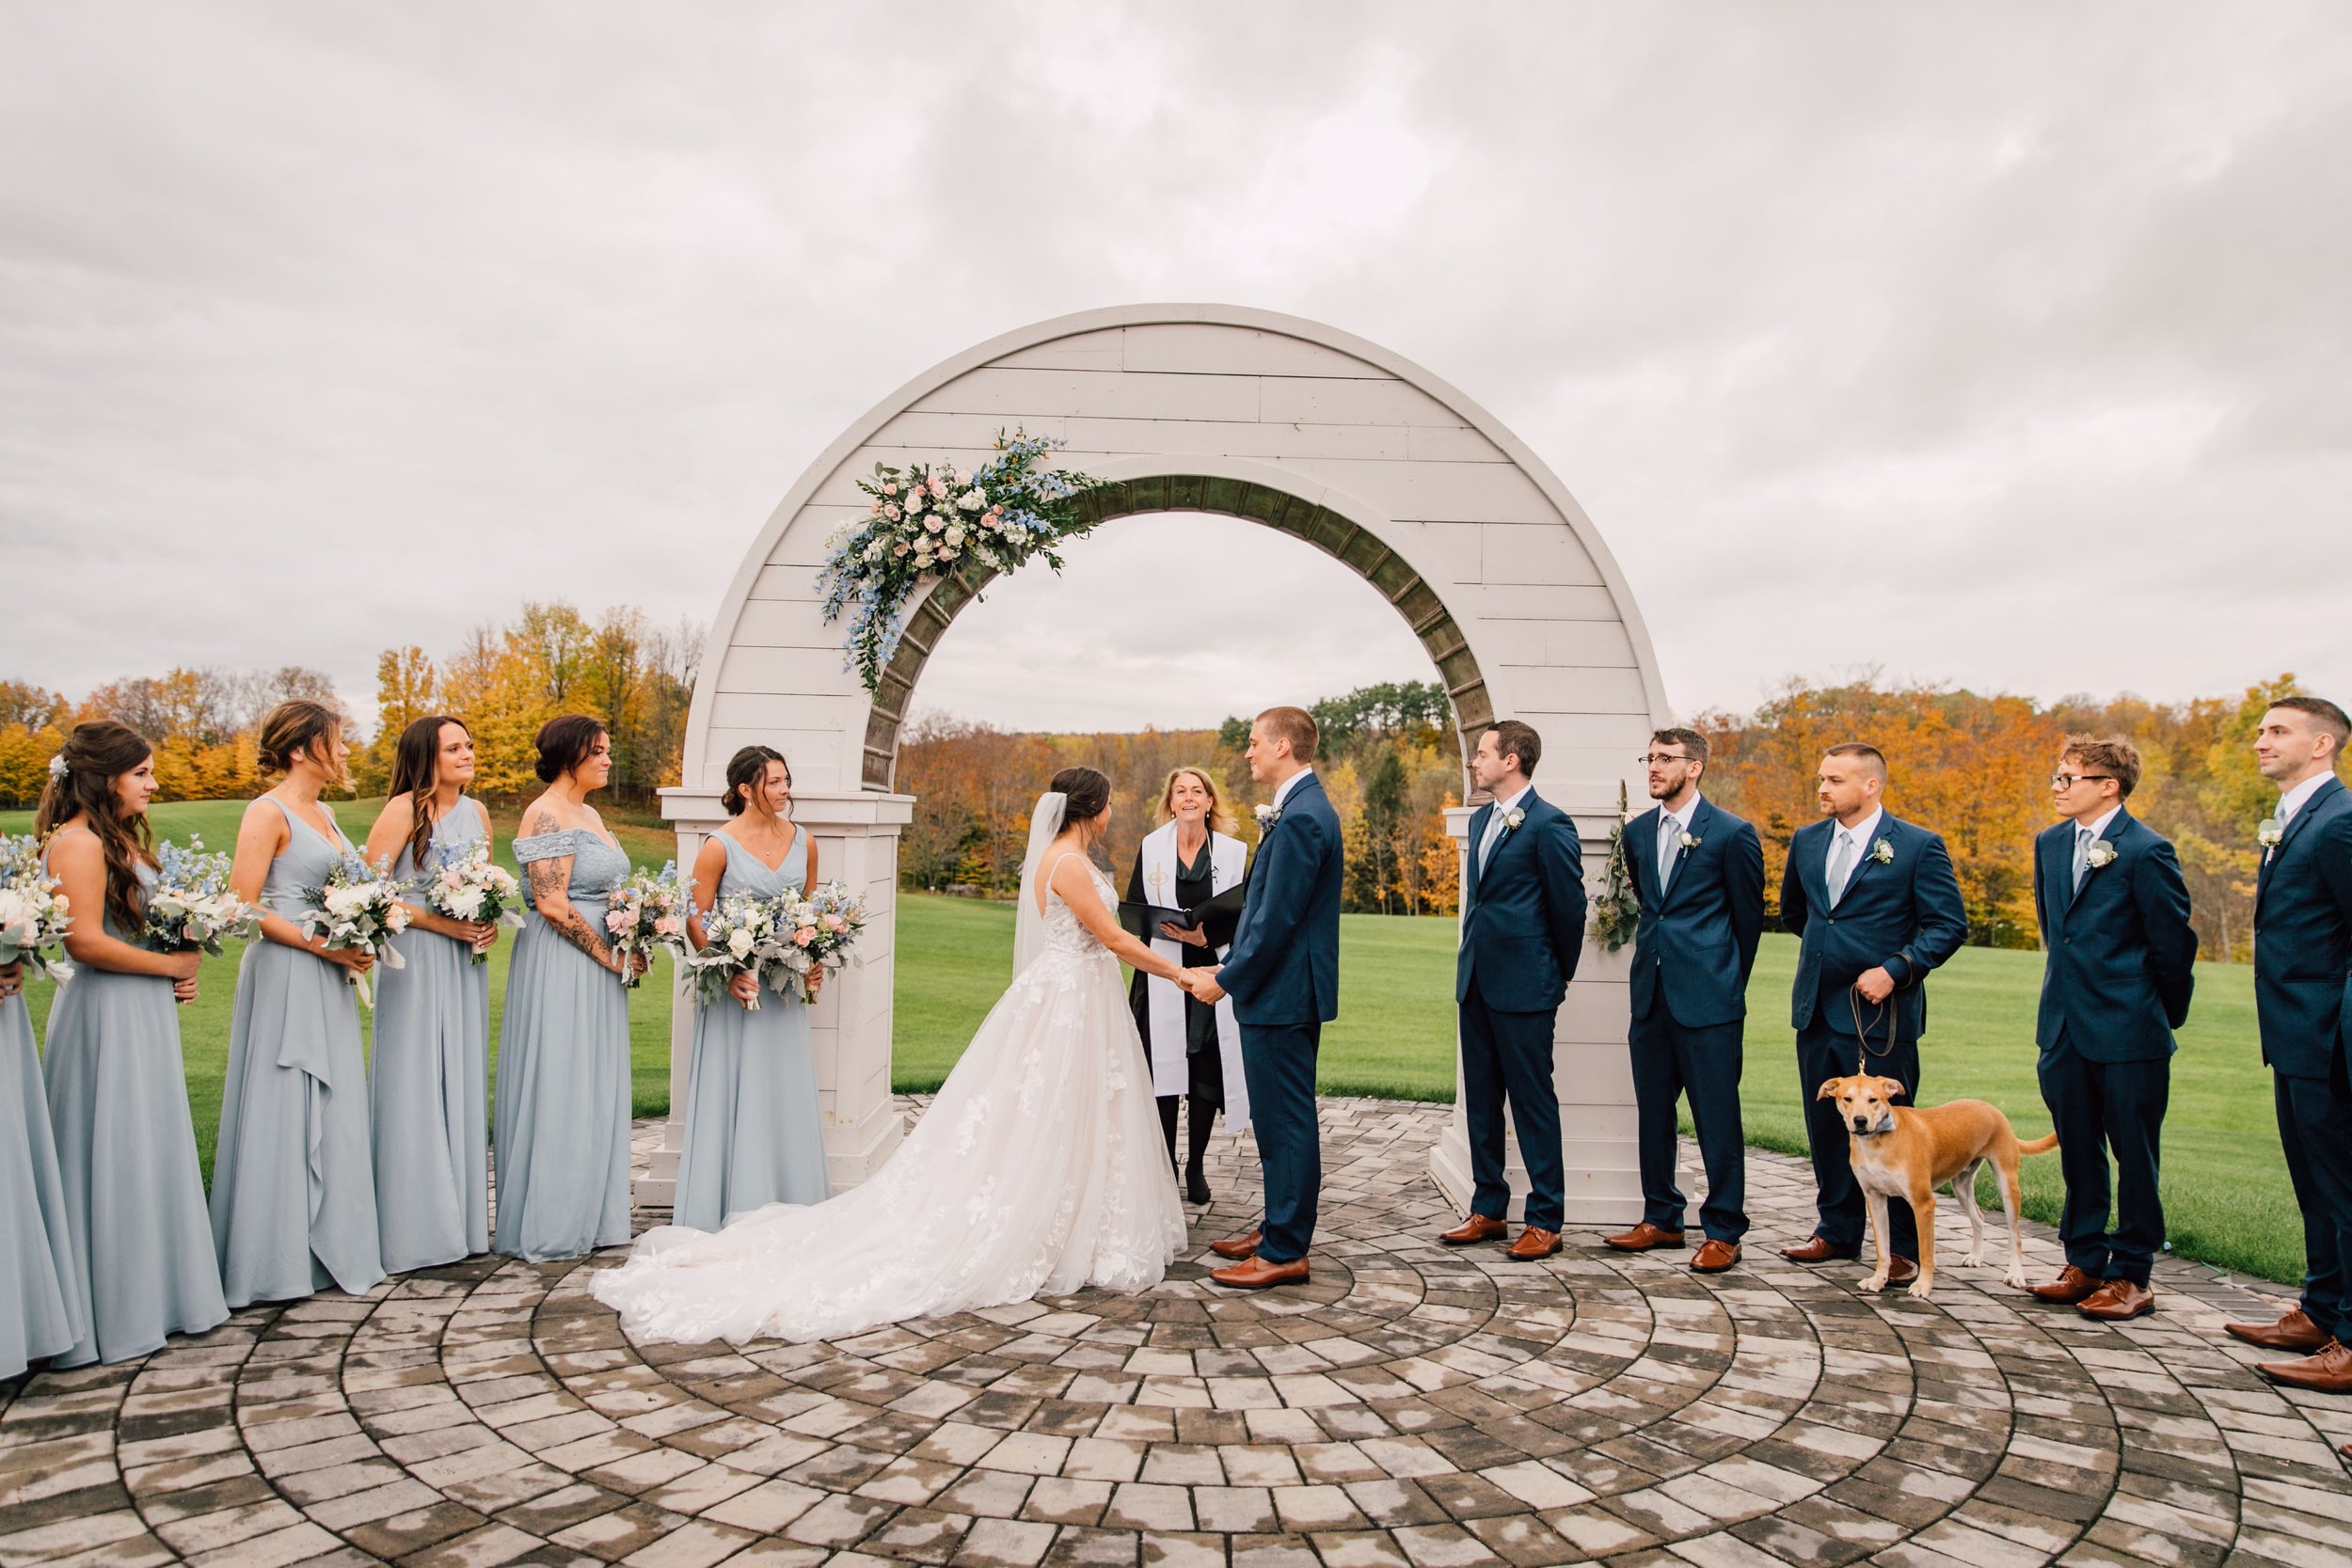  the bride and groom stand together during their outdoor fall wedding ceremony at hayloft on the arch  